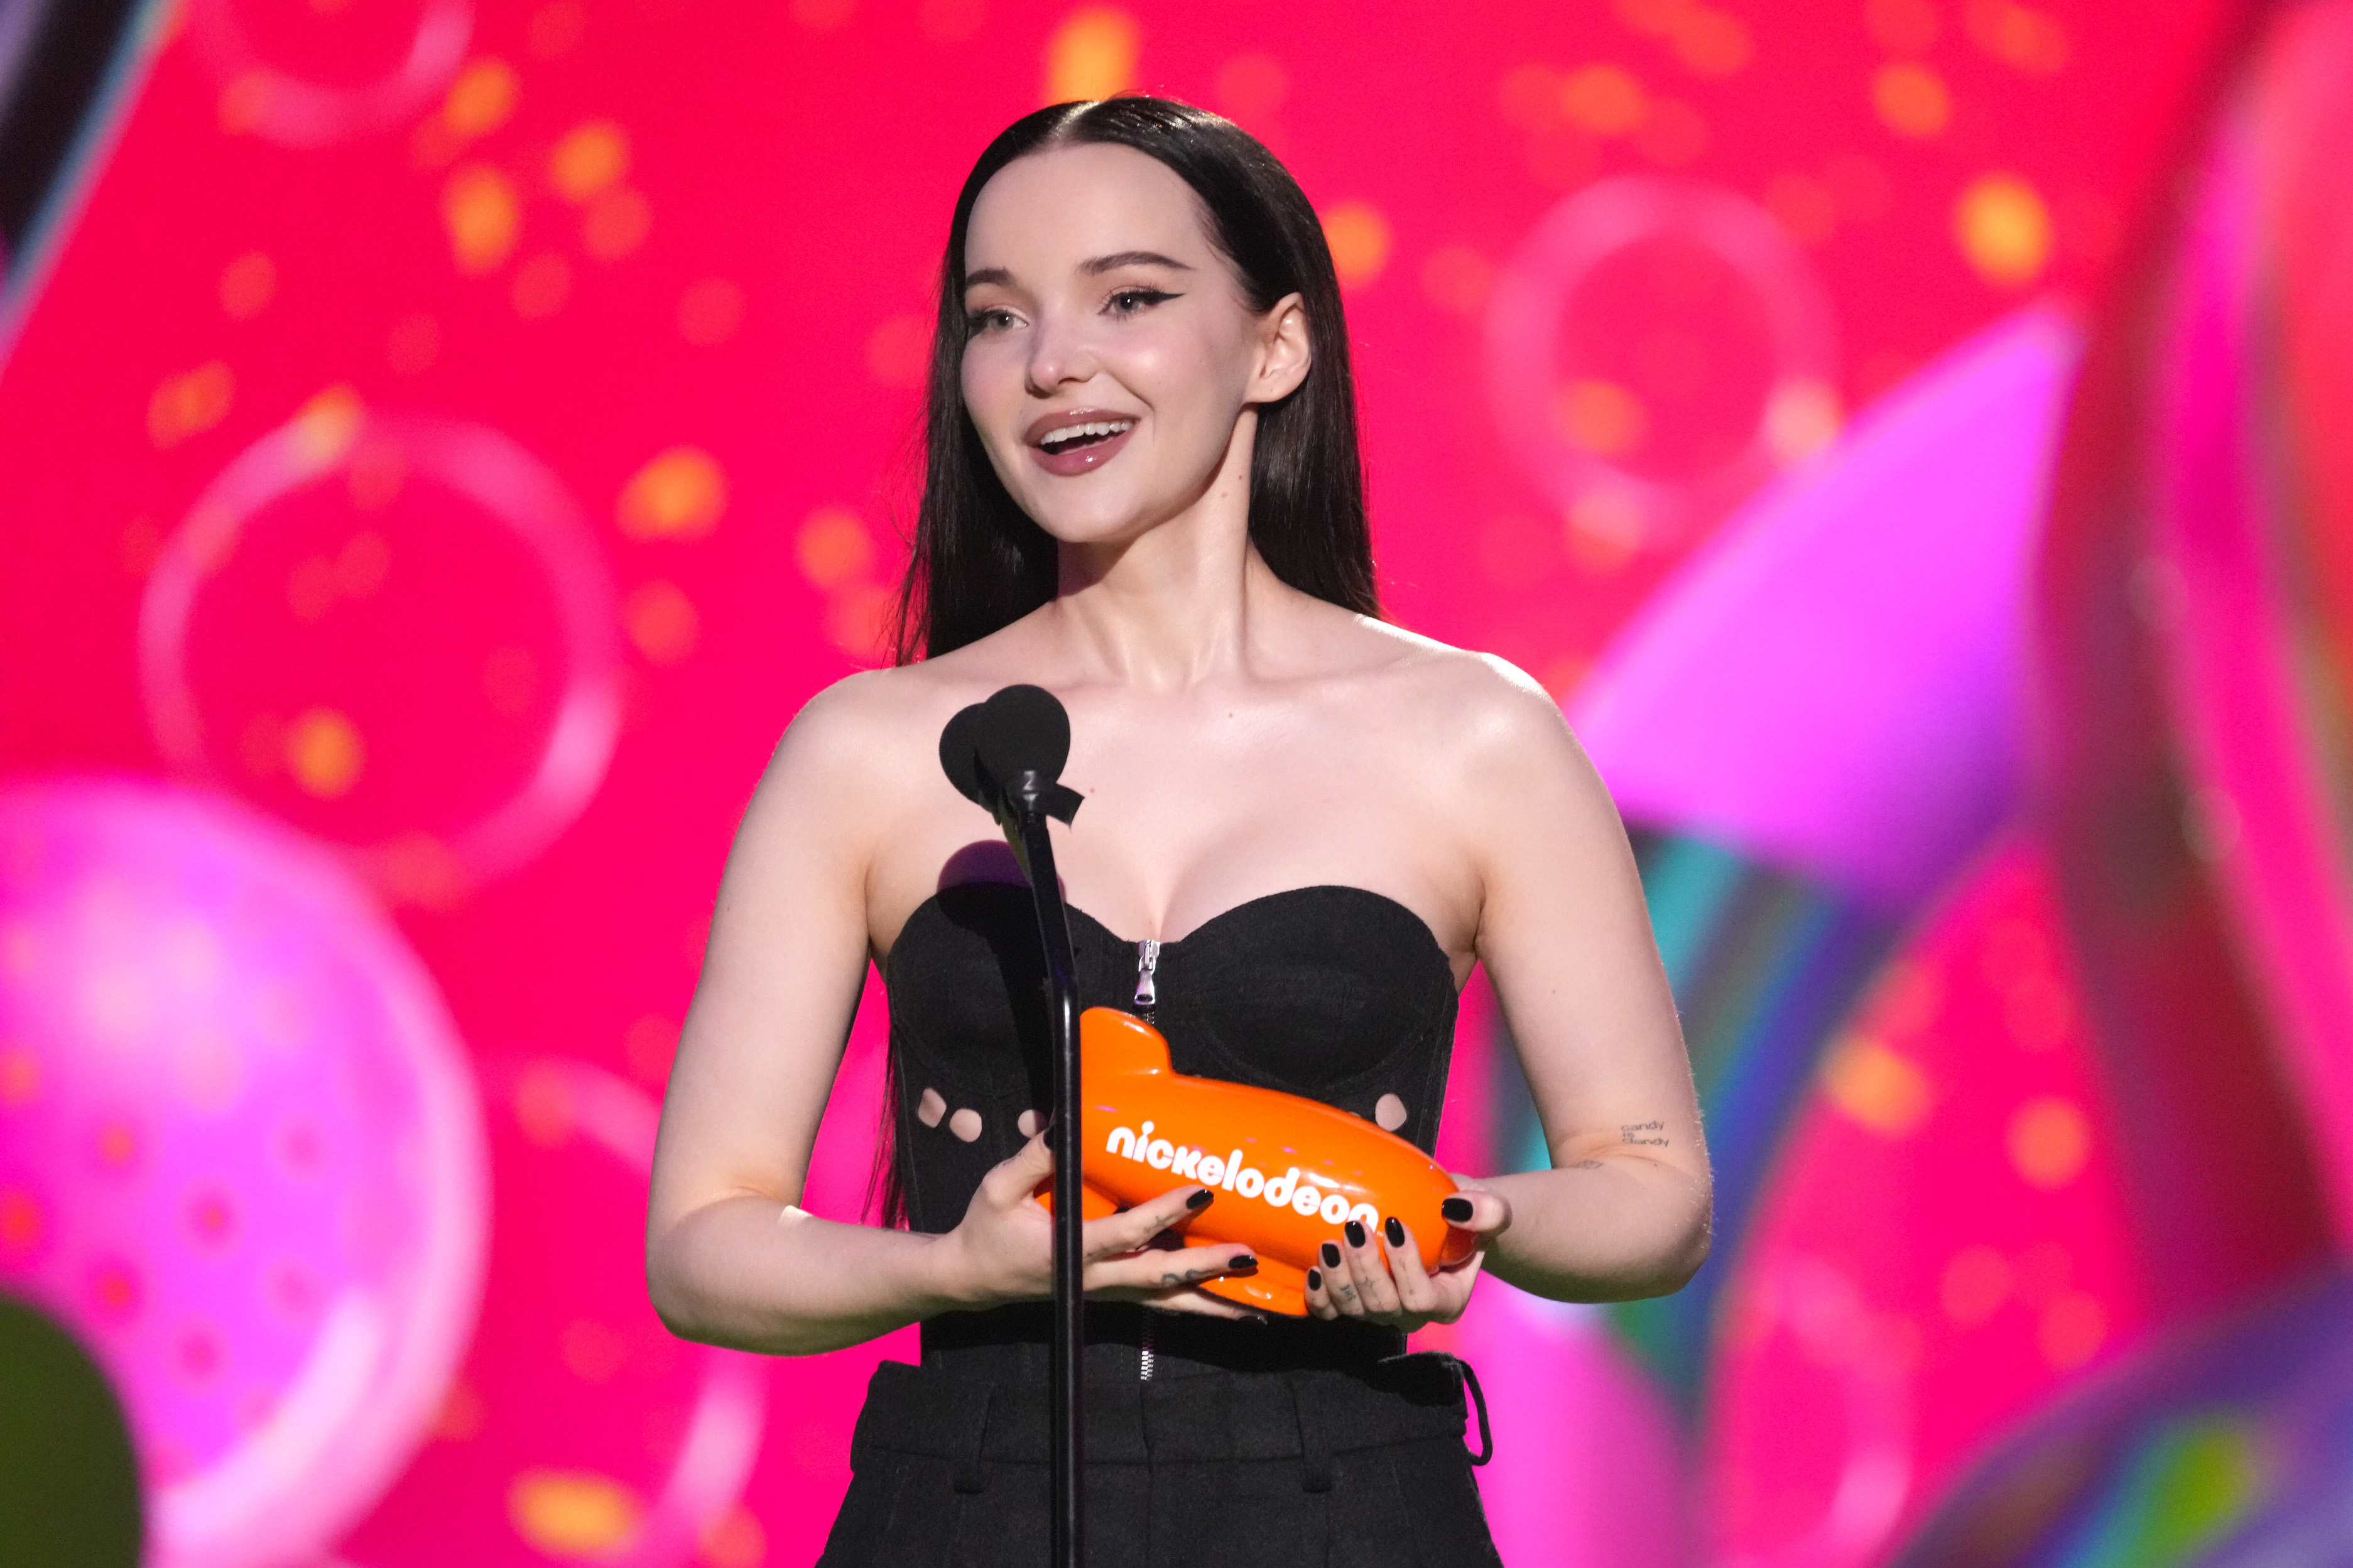 Dove Cameron accepts the Favorite Breakout Artist award onstage during the 2023 Nickelodeon Kids' Choice Awards at Microsoft Theater on March 04, 2023 in Los Angeles, California. (Photo by Kevin Mazur/Getty Images for Nickelodeon)